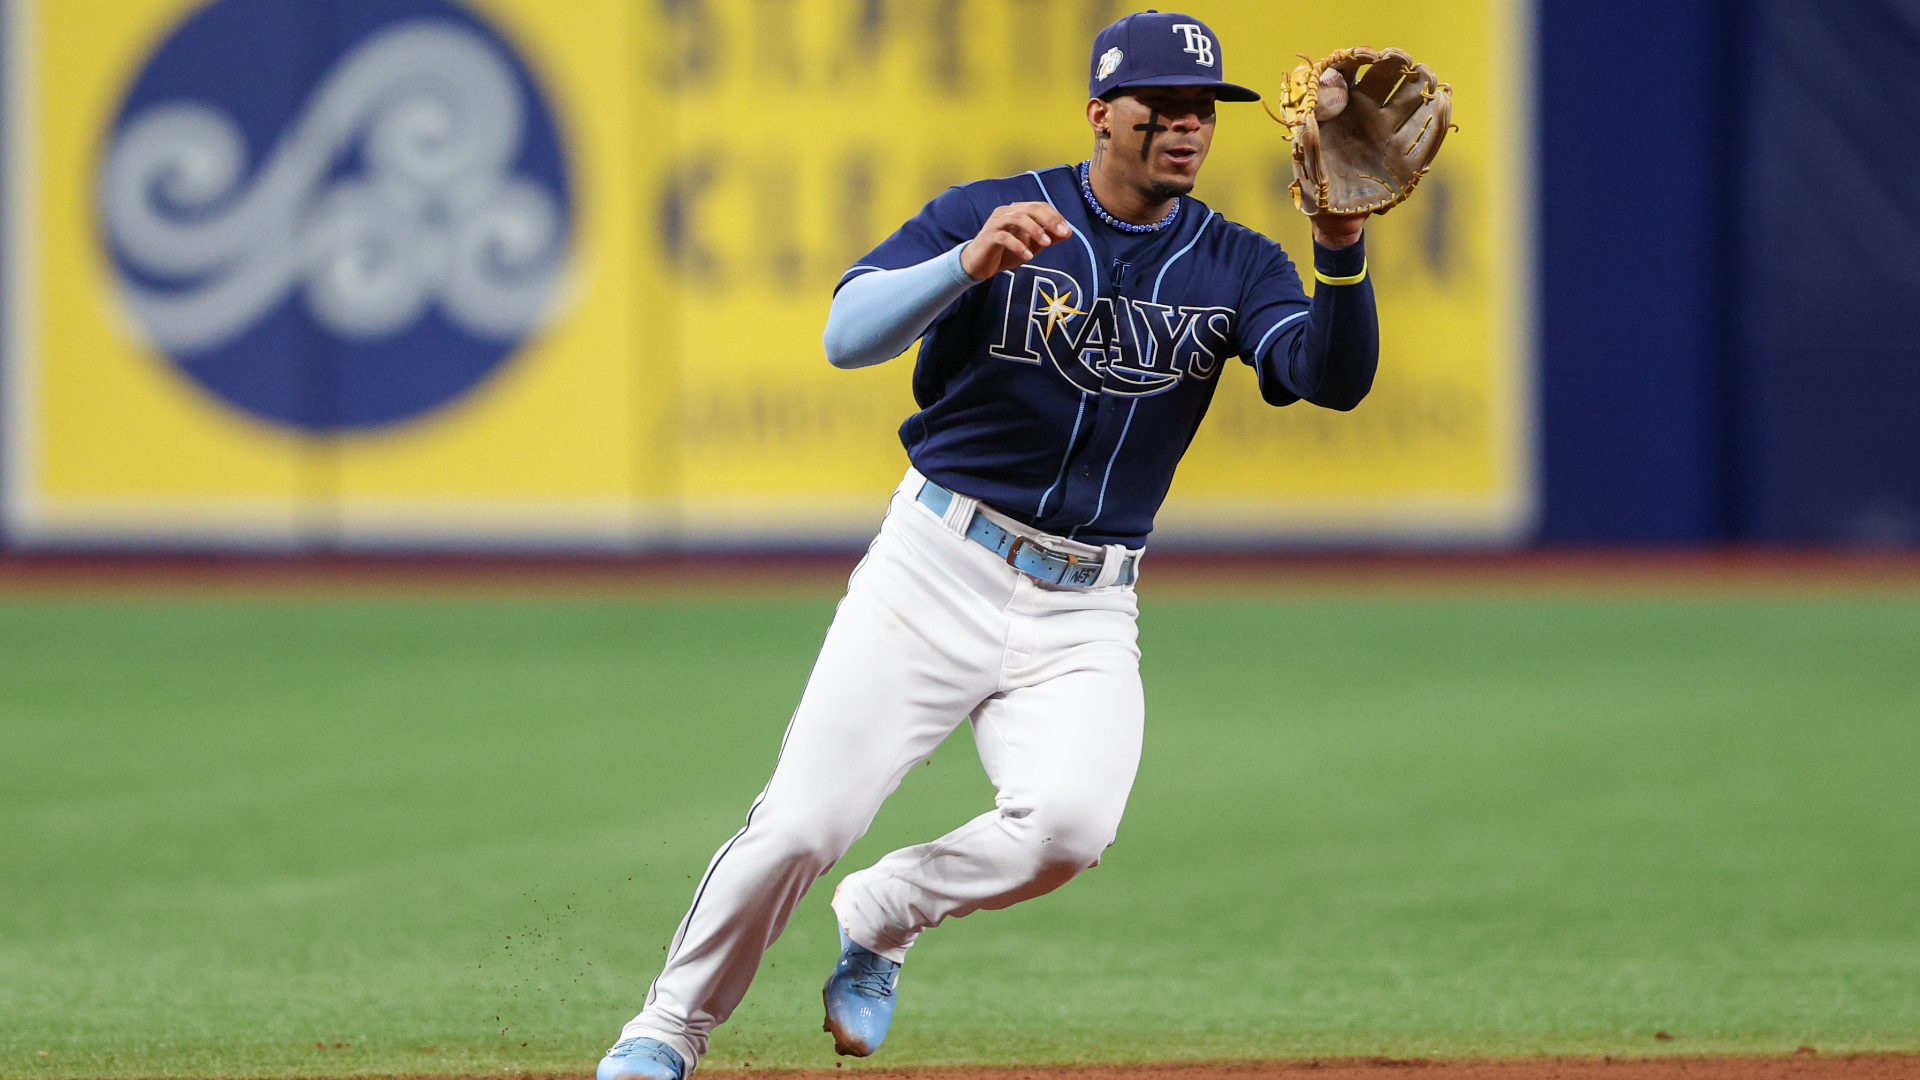 Rays Issue Statement On Wander Franco After Jarring Social Media
Speculation